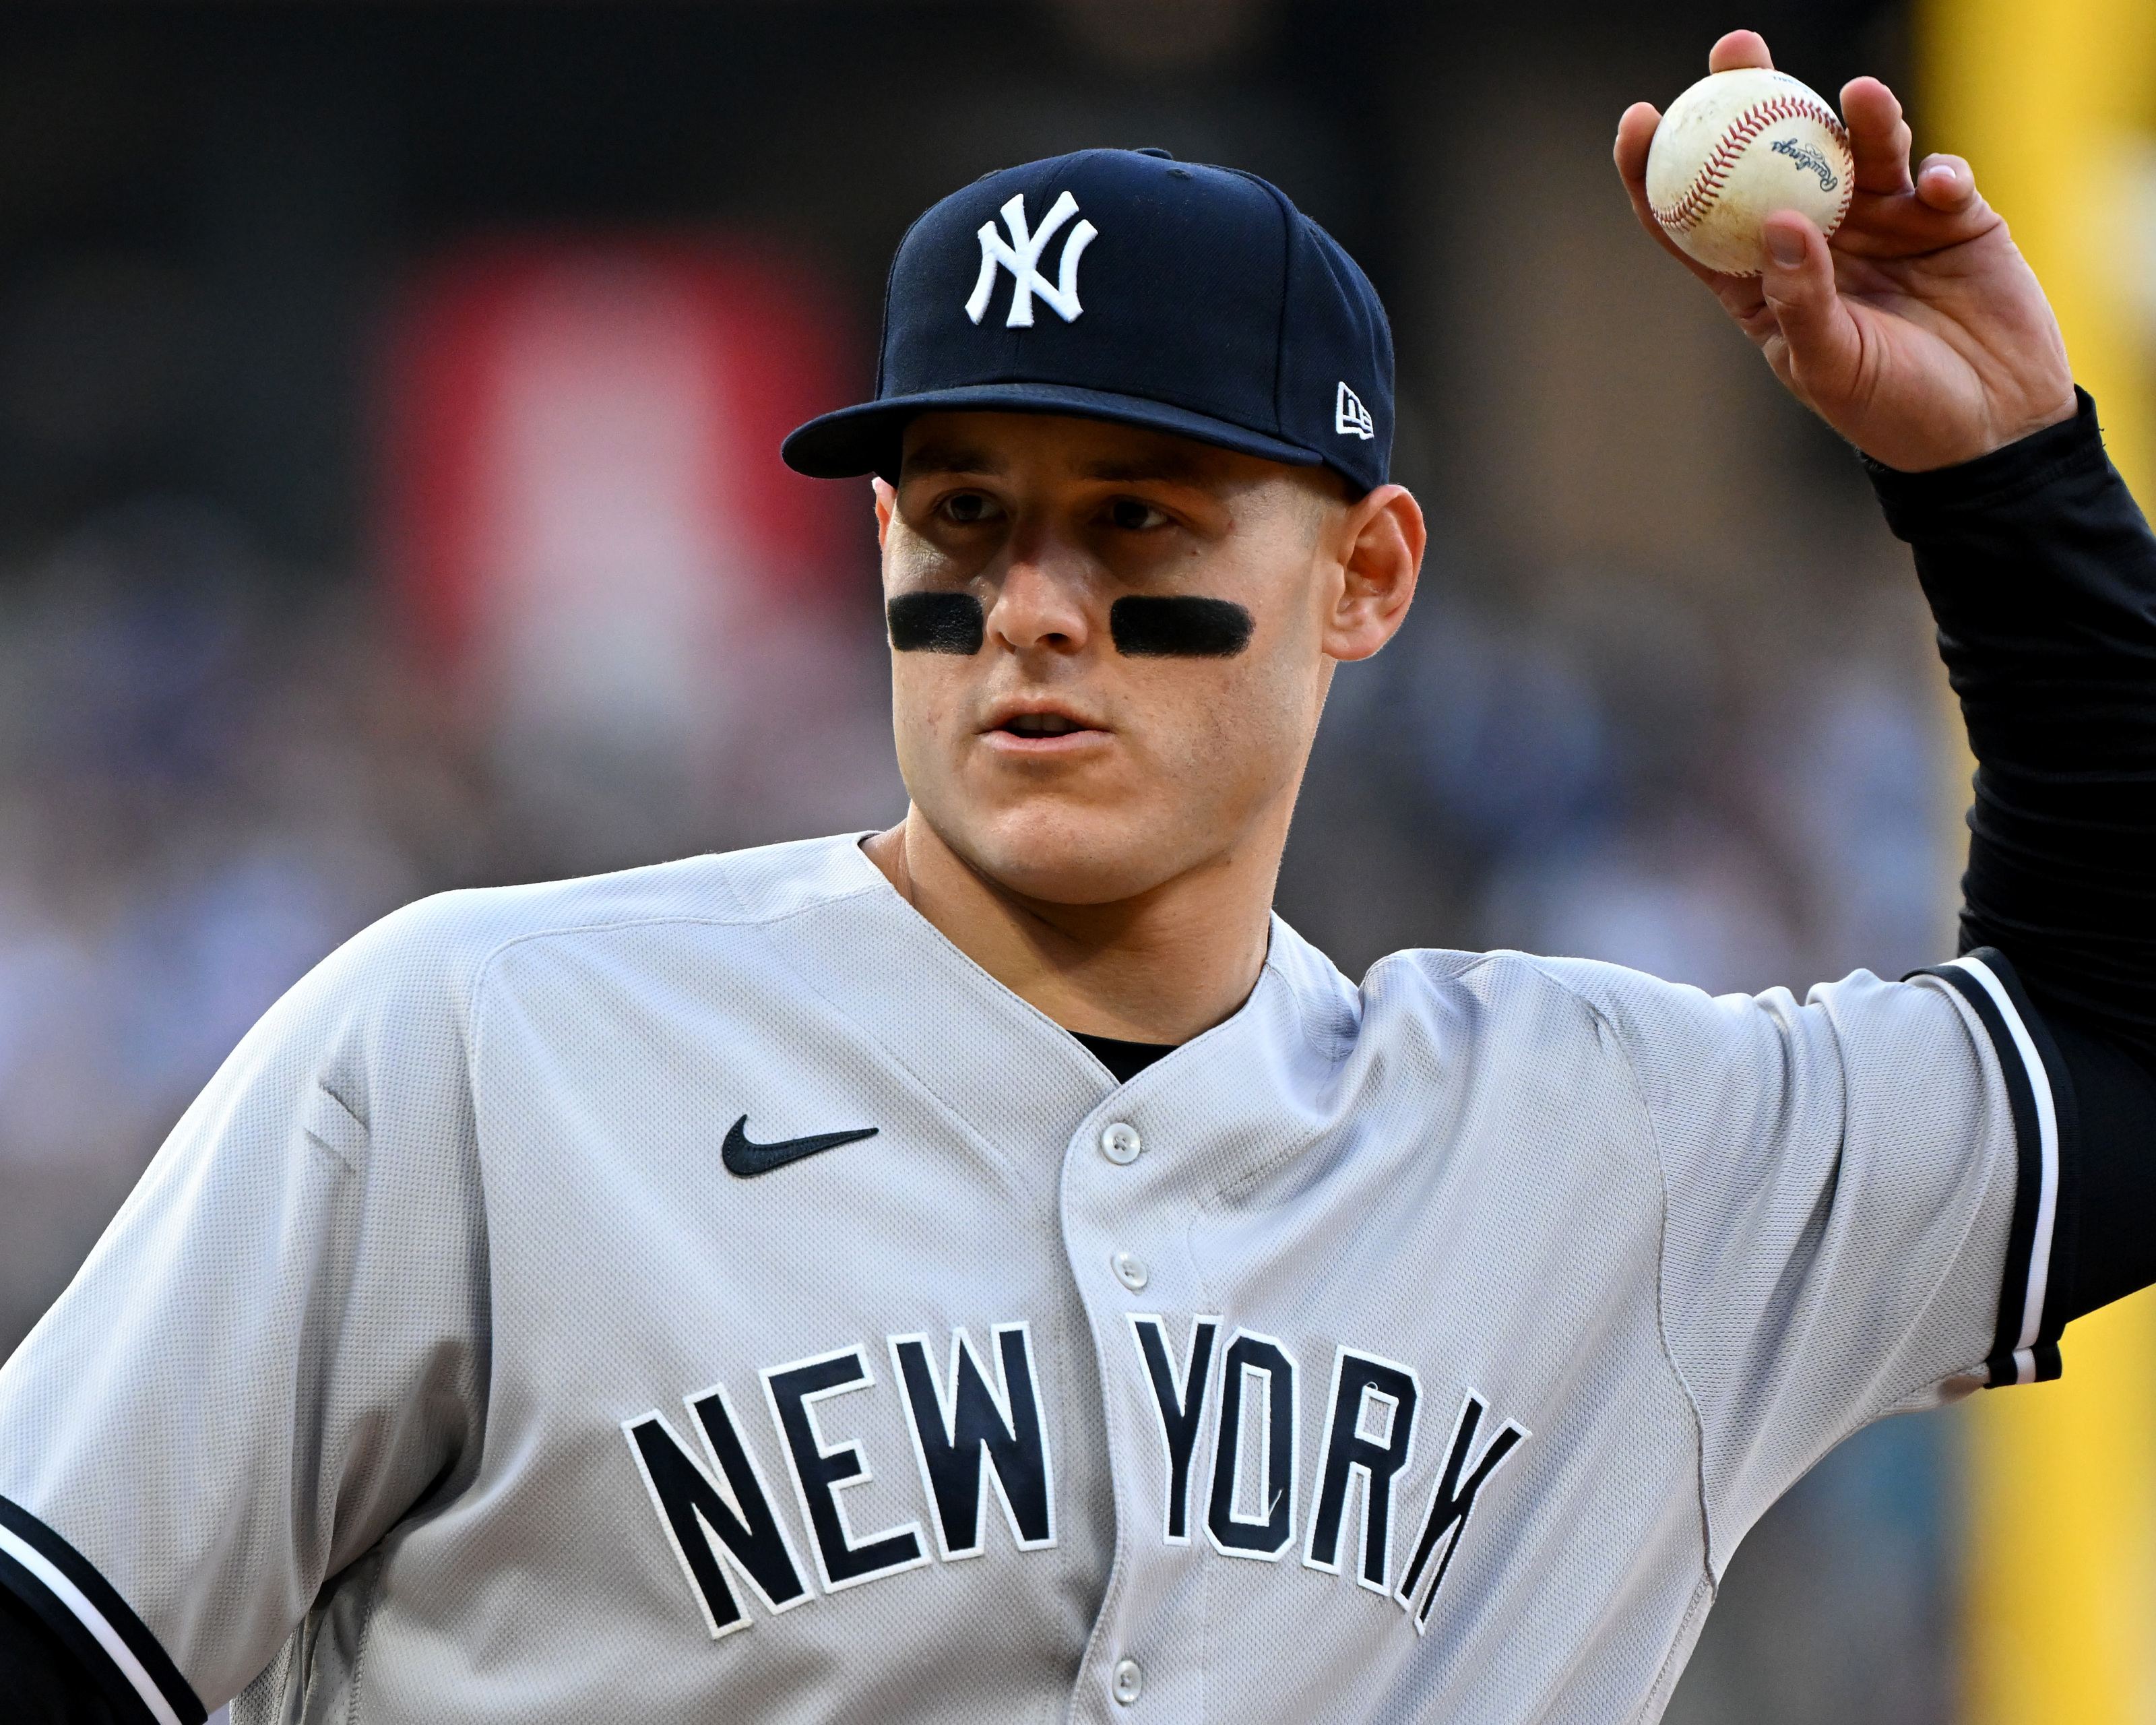 The Yankees are getting elite production from Anthony Rizzo